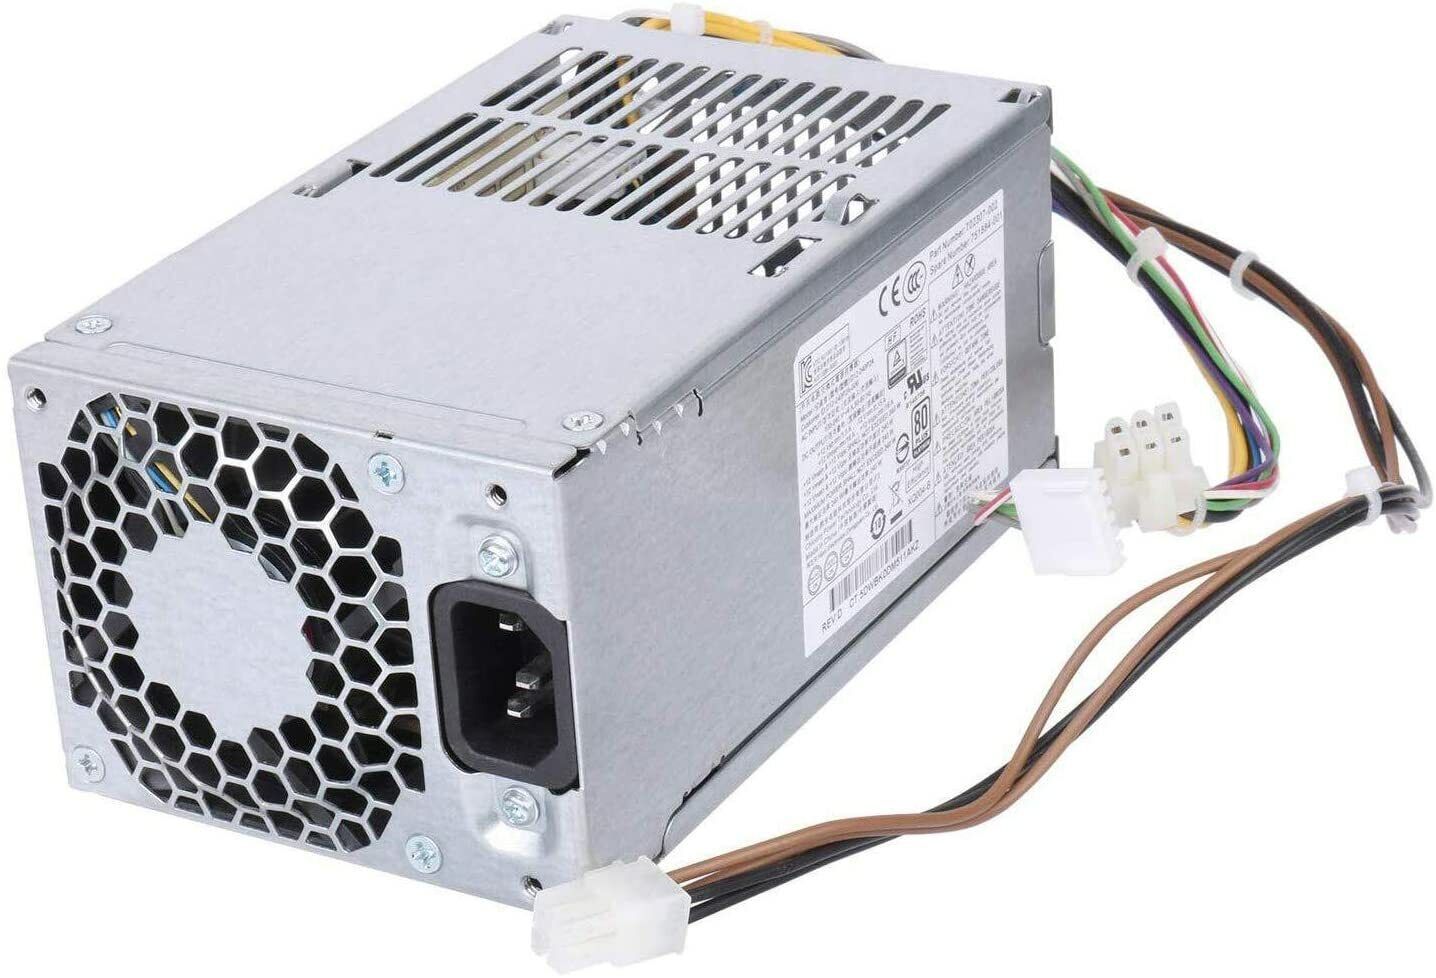 New 240W Power Supply Replacement for HP ProDesk 400 600 800 G1 G2 751886-001